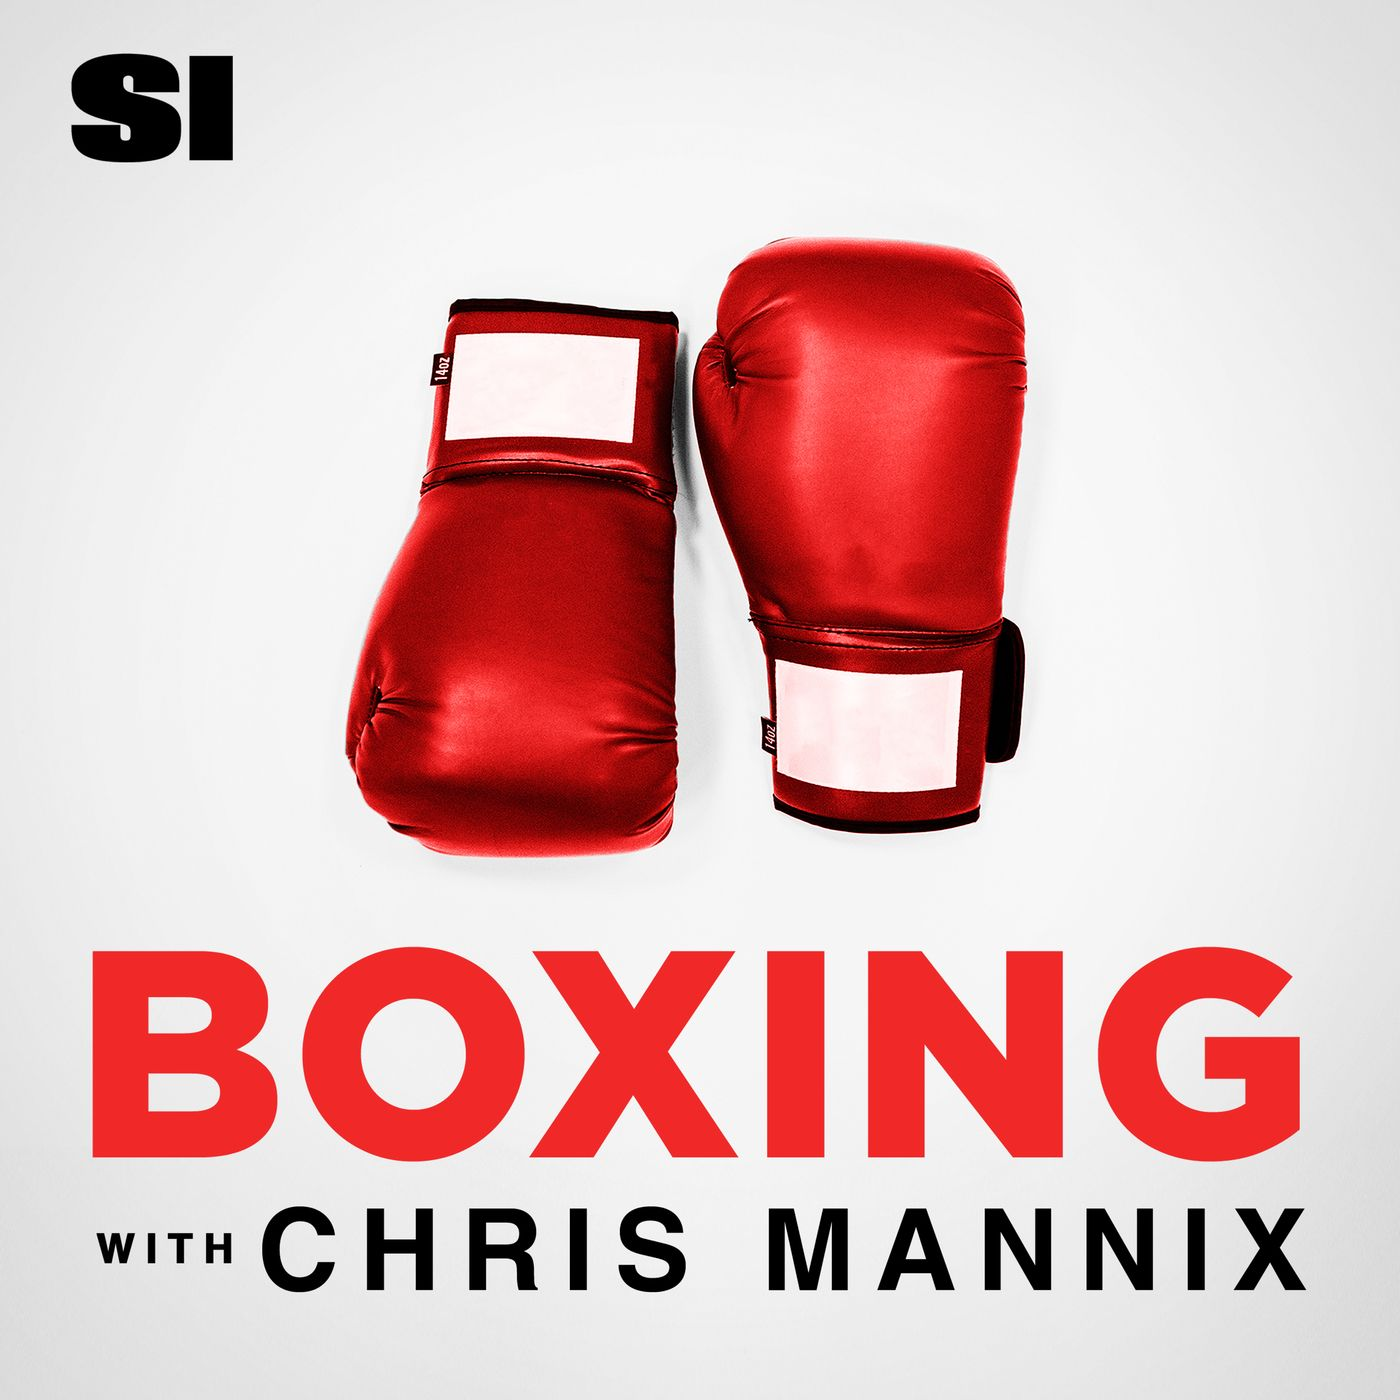 A highlight from Boxing with Chris Mannix - Anthony Joshua - Dillian Whyte is off